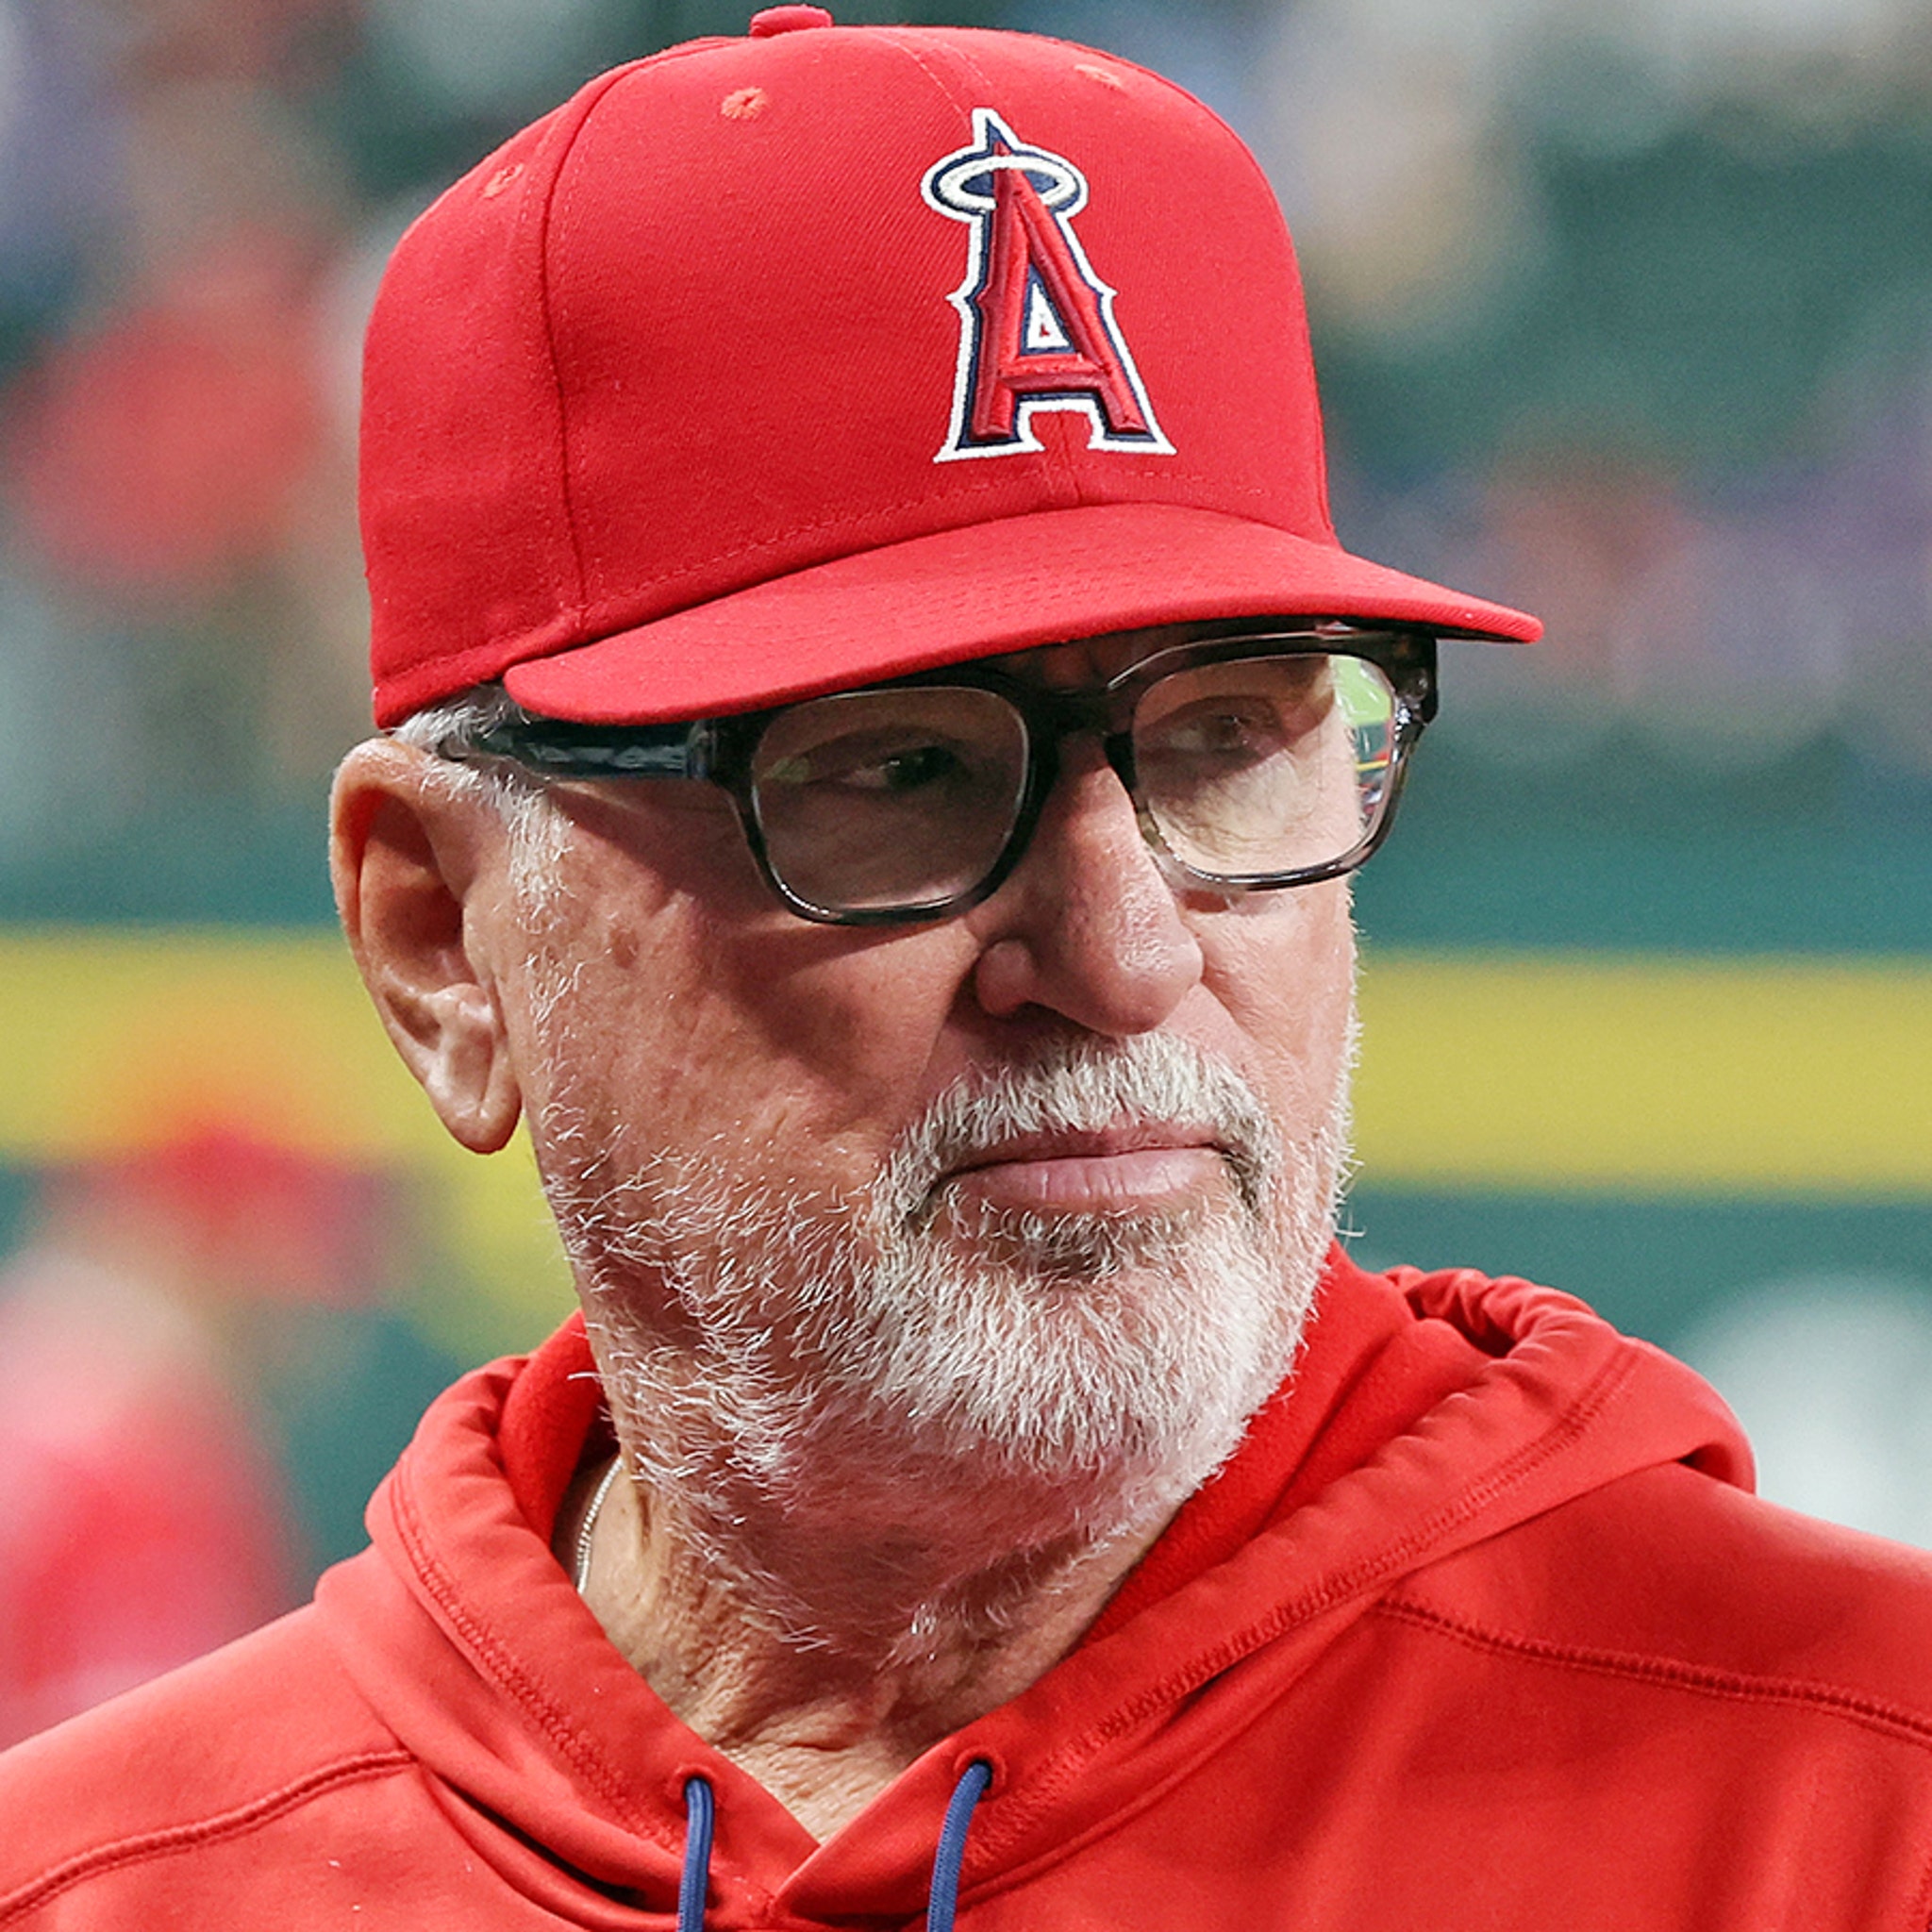 Joe Maddon switched hairstyles to 'awaken' Angels during losing streak,  never got to show it: report